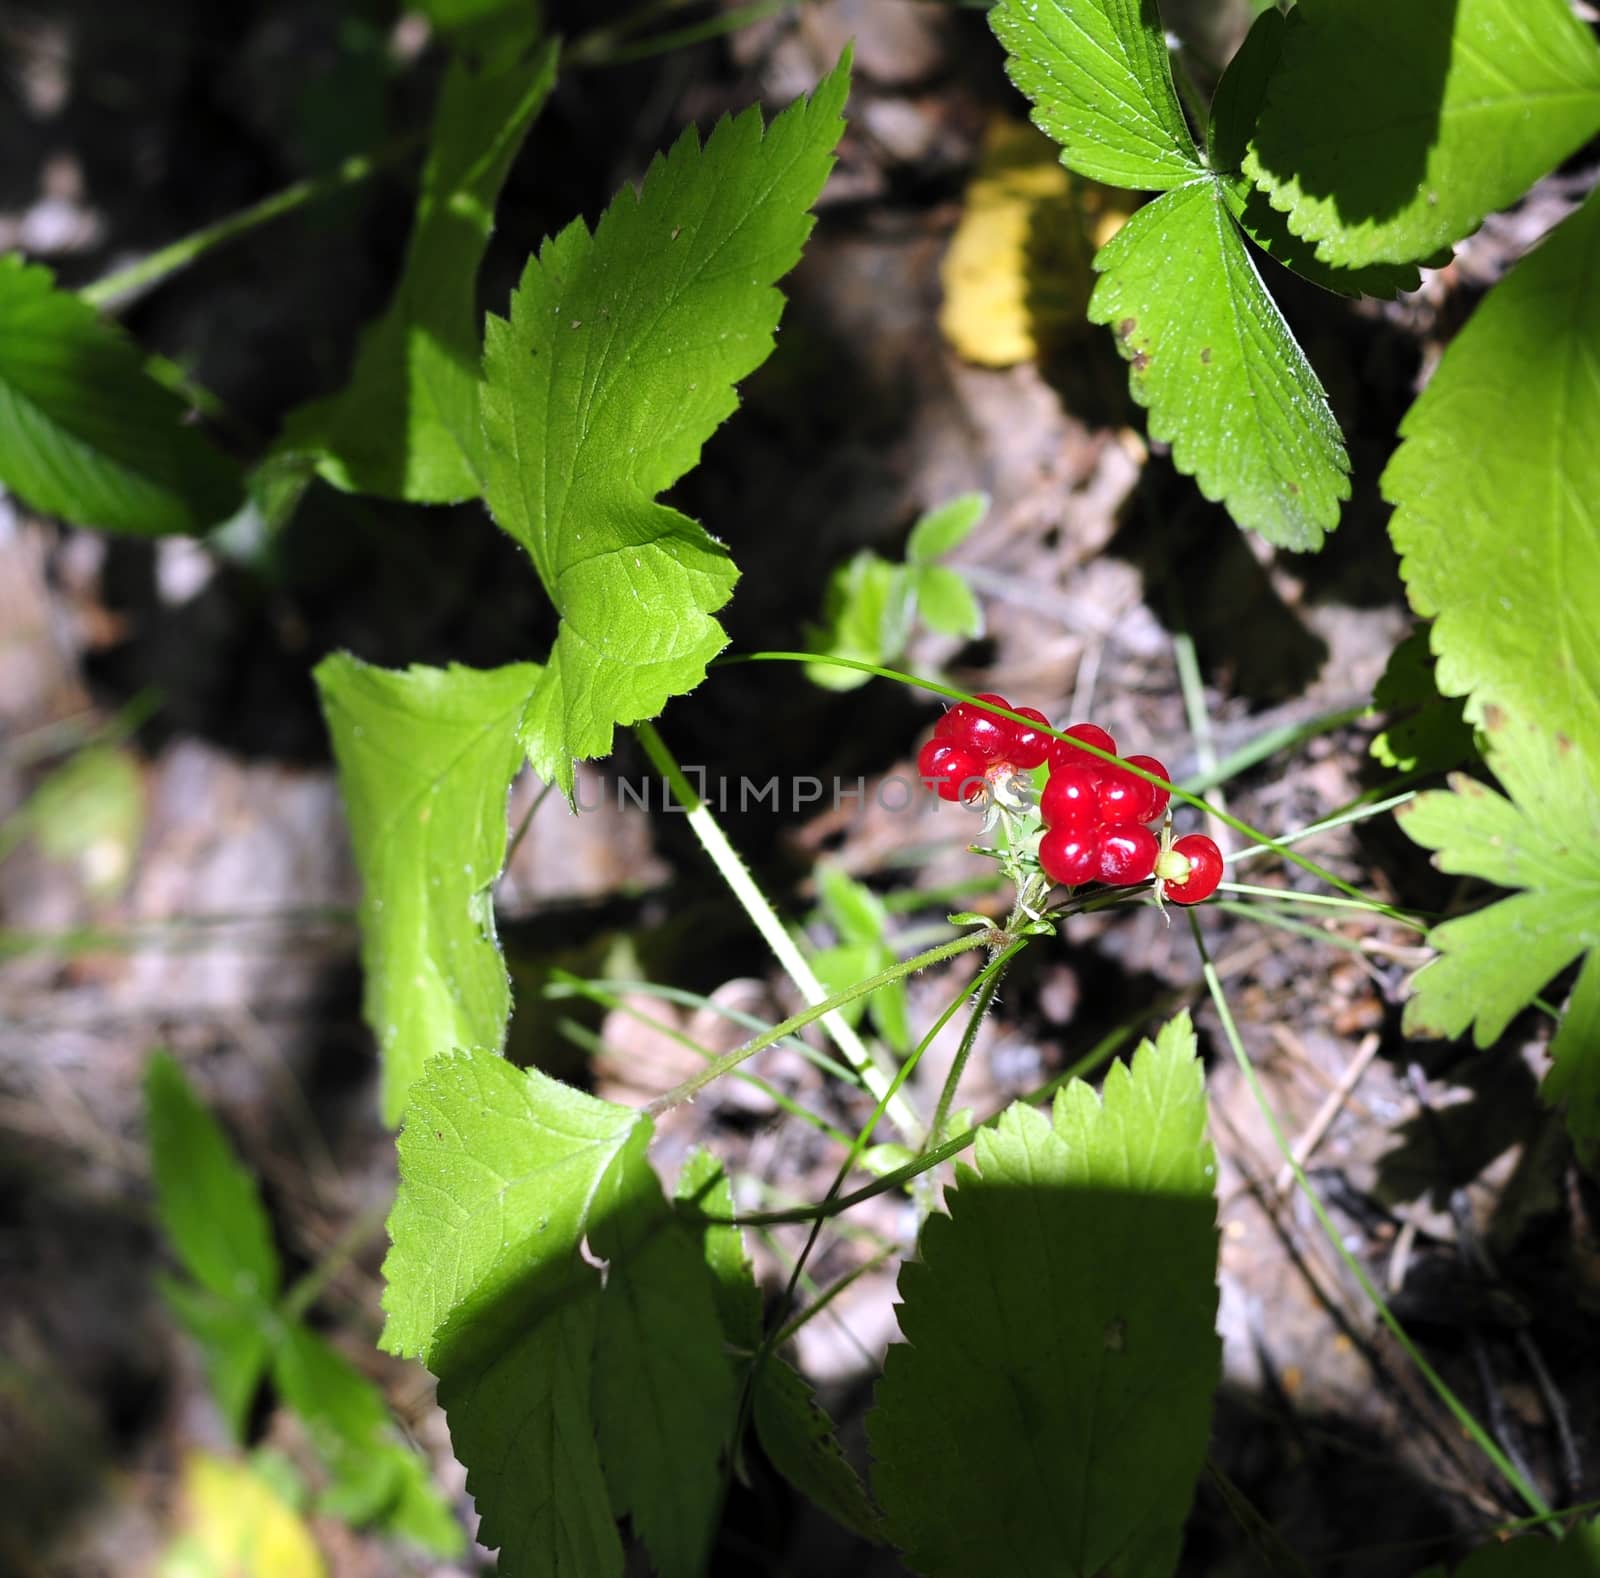 Wild red ripe berries and green leafs close-up, forest on background